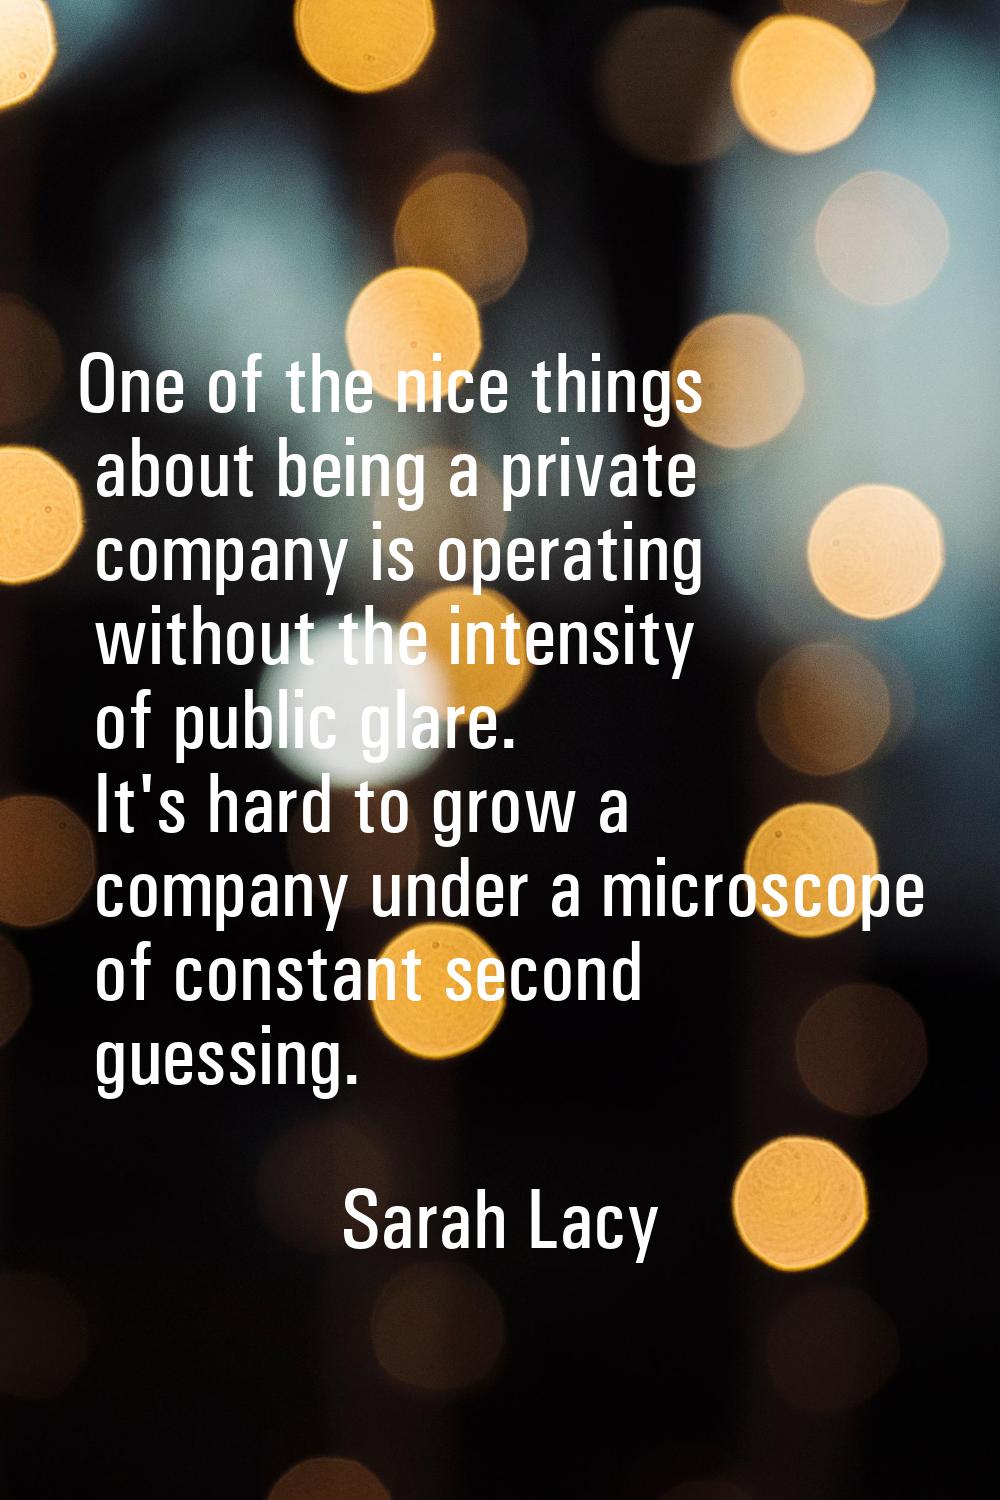 One of the nice things about being a private company is operating without the intensity of public g